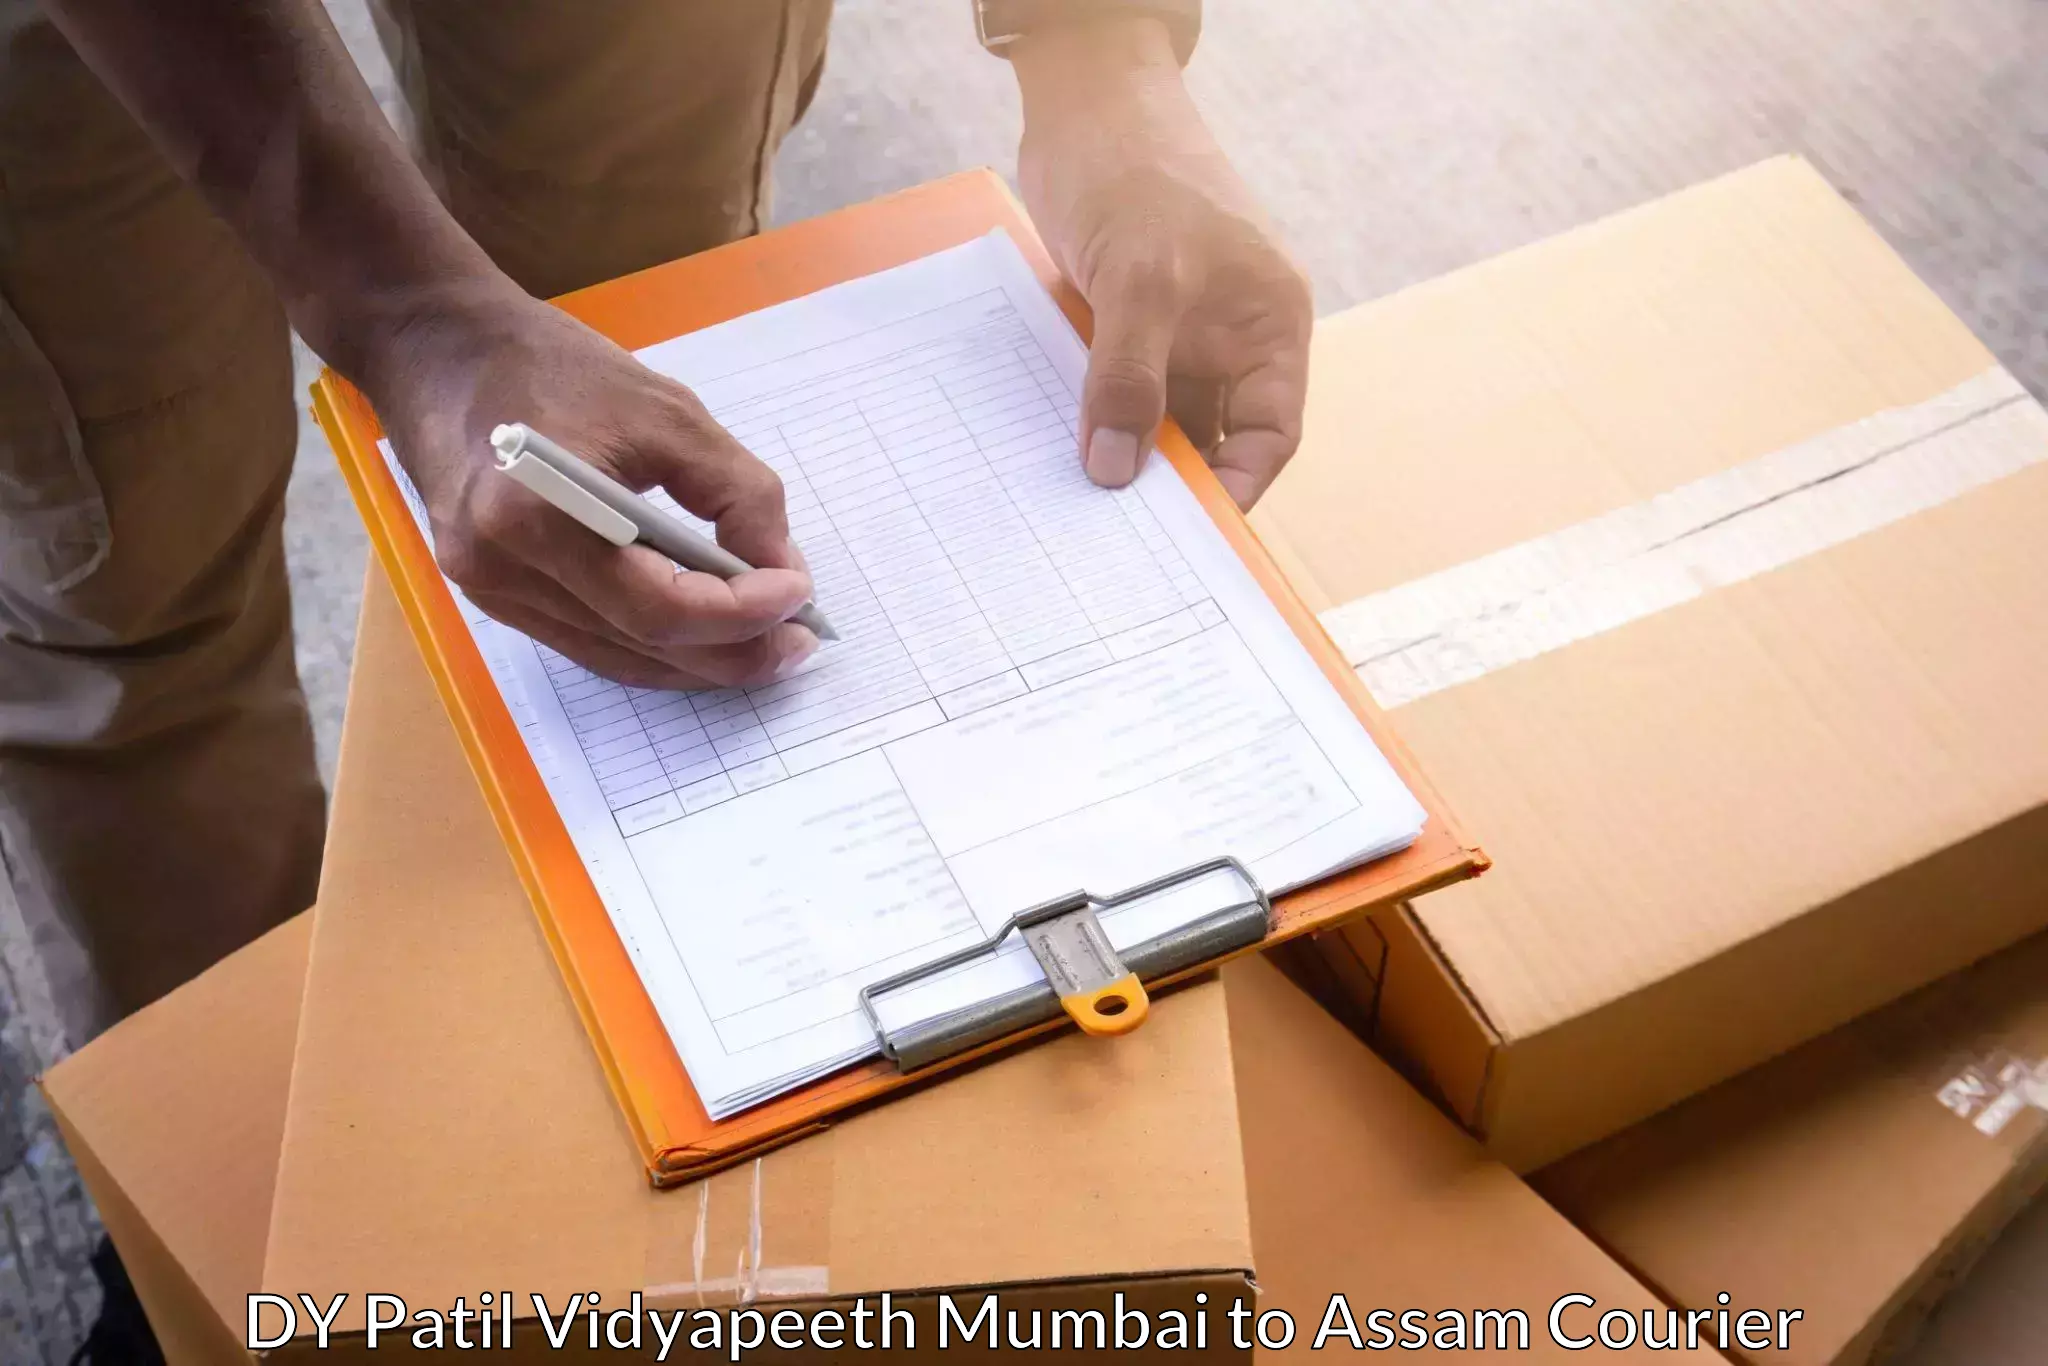 Emergency parcel delivery in DY Patil Vidyapeeth Mumbai to Guwahati University